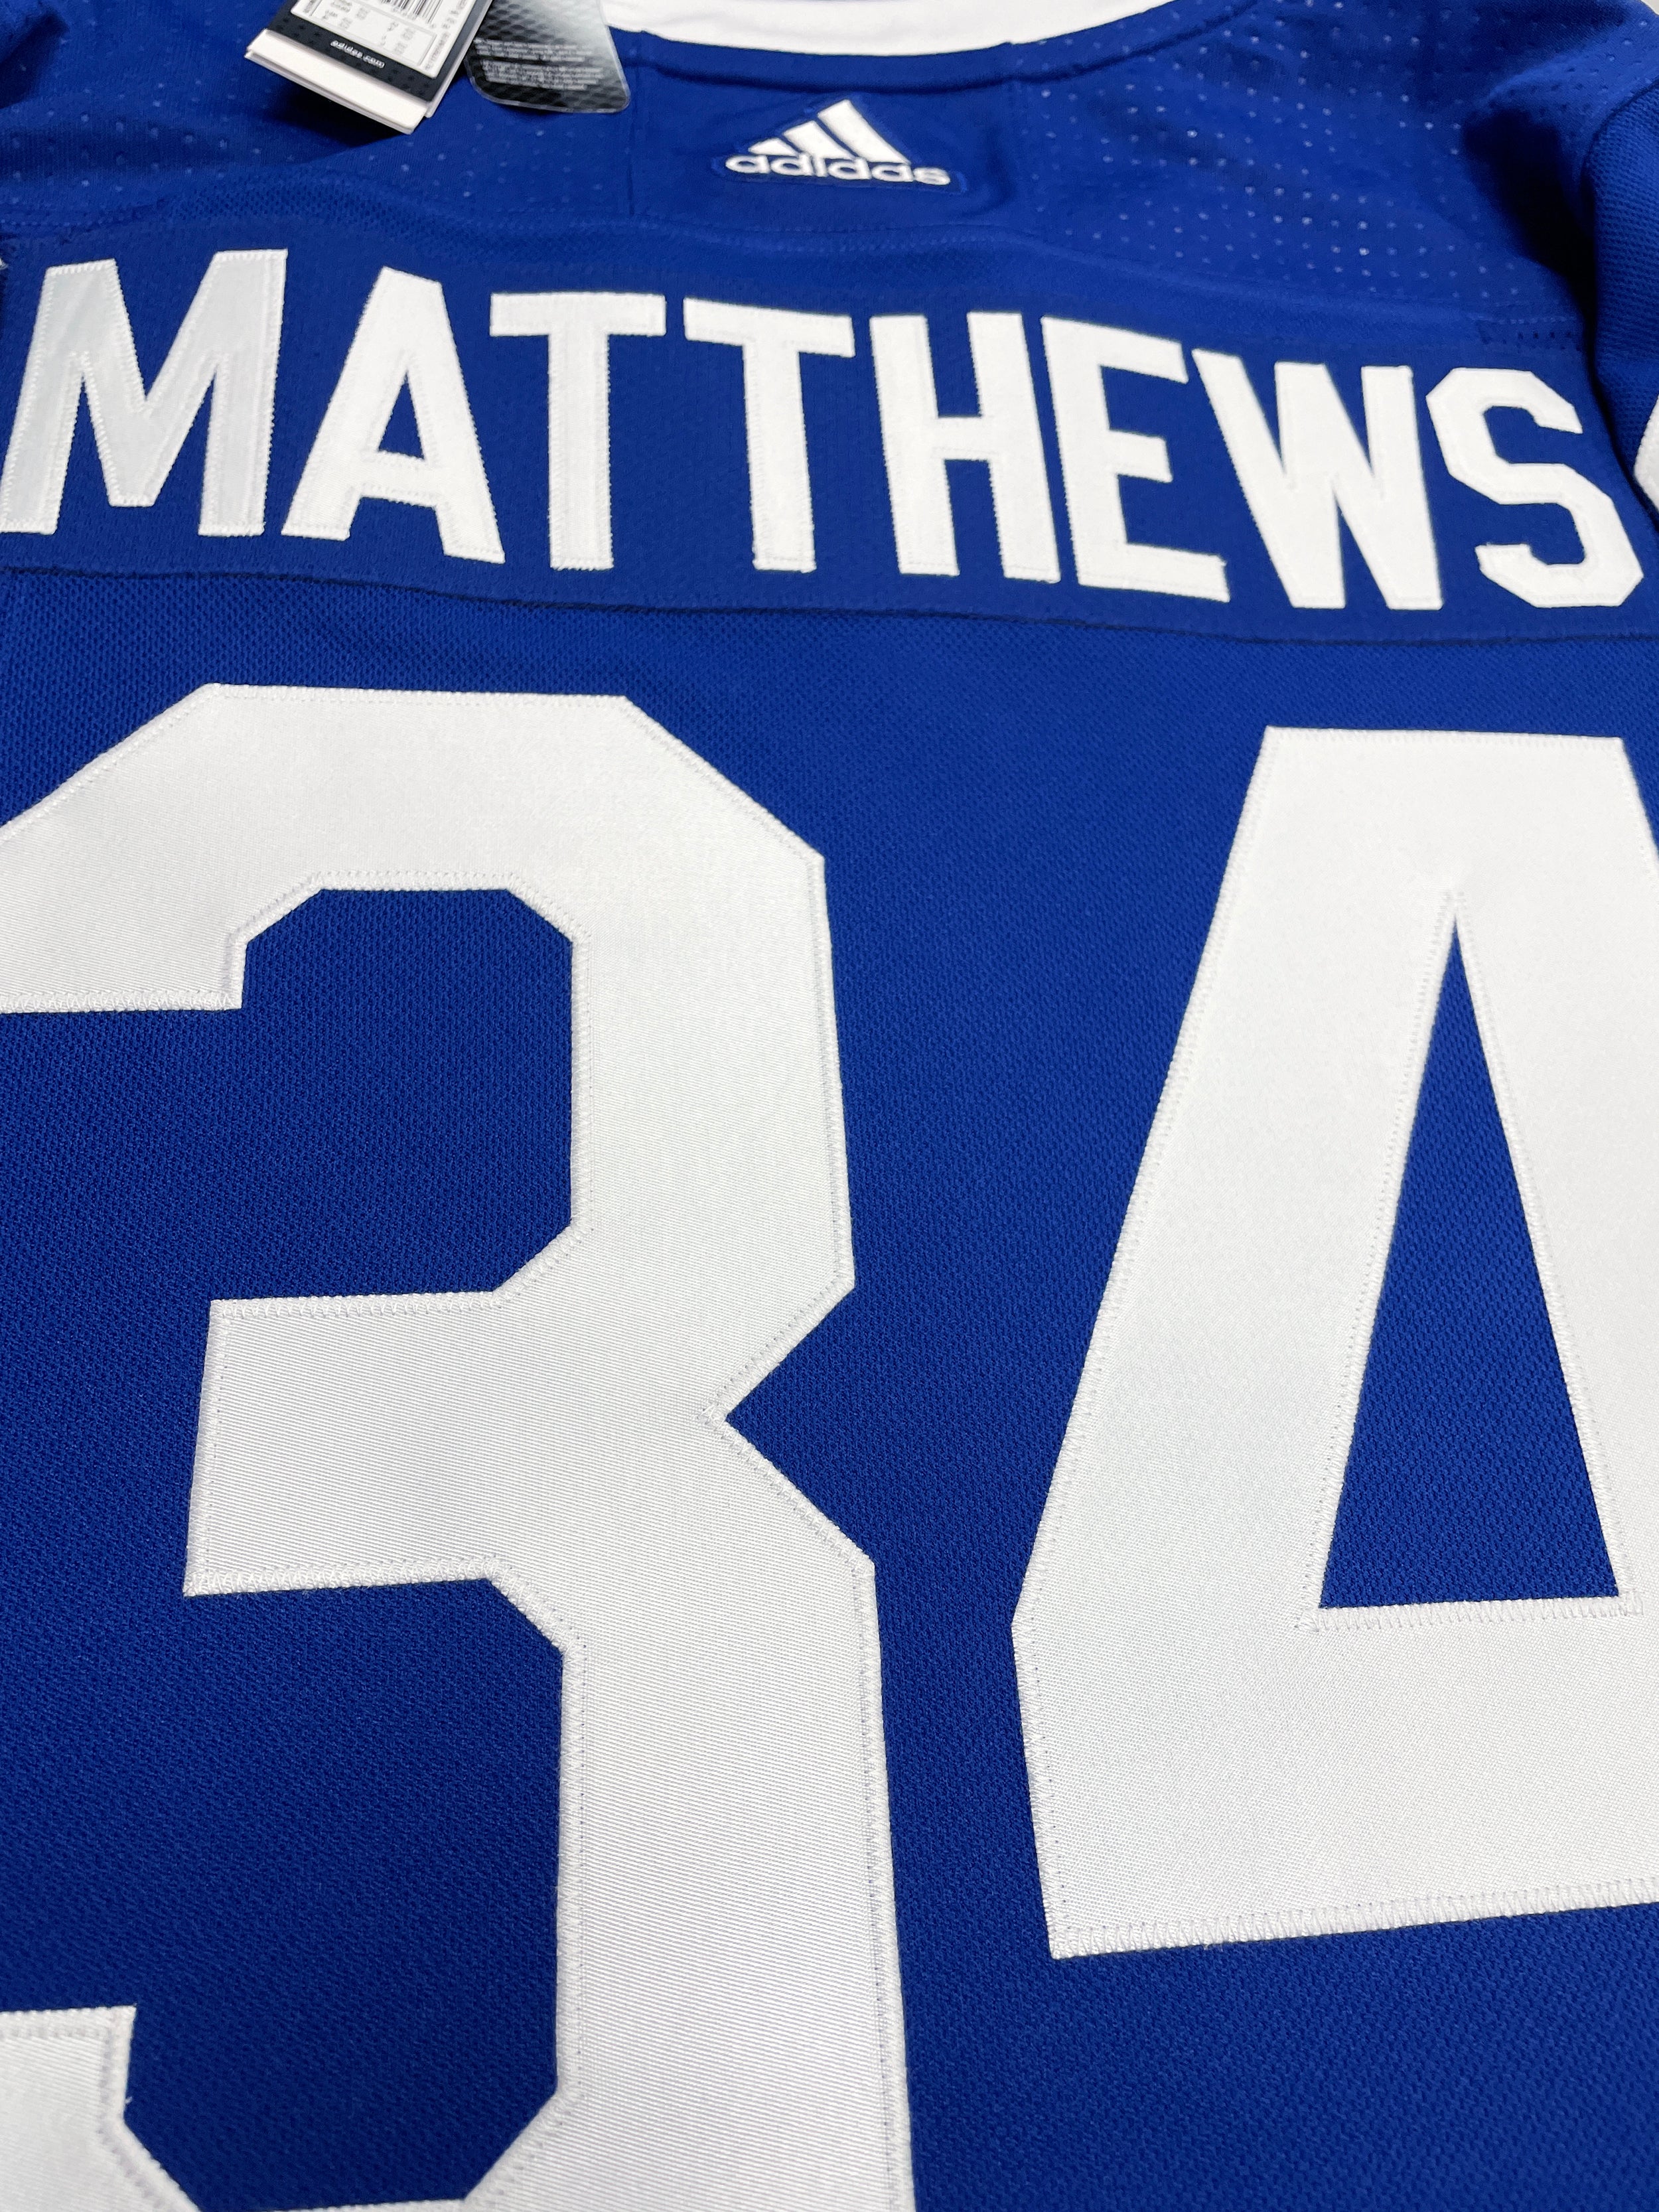 Auston Matthews Signed Toronto Maple Leafs Blue Adidas Auth. Jersey with A